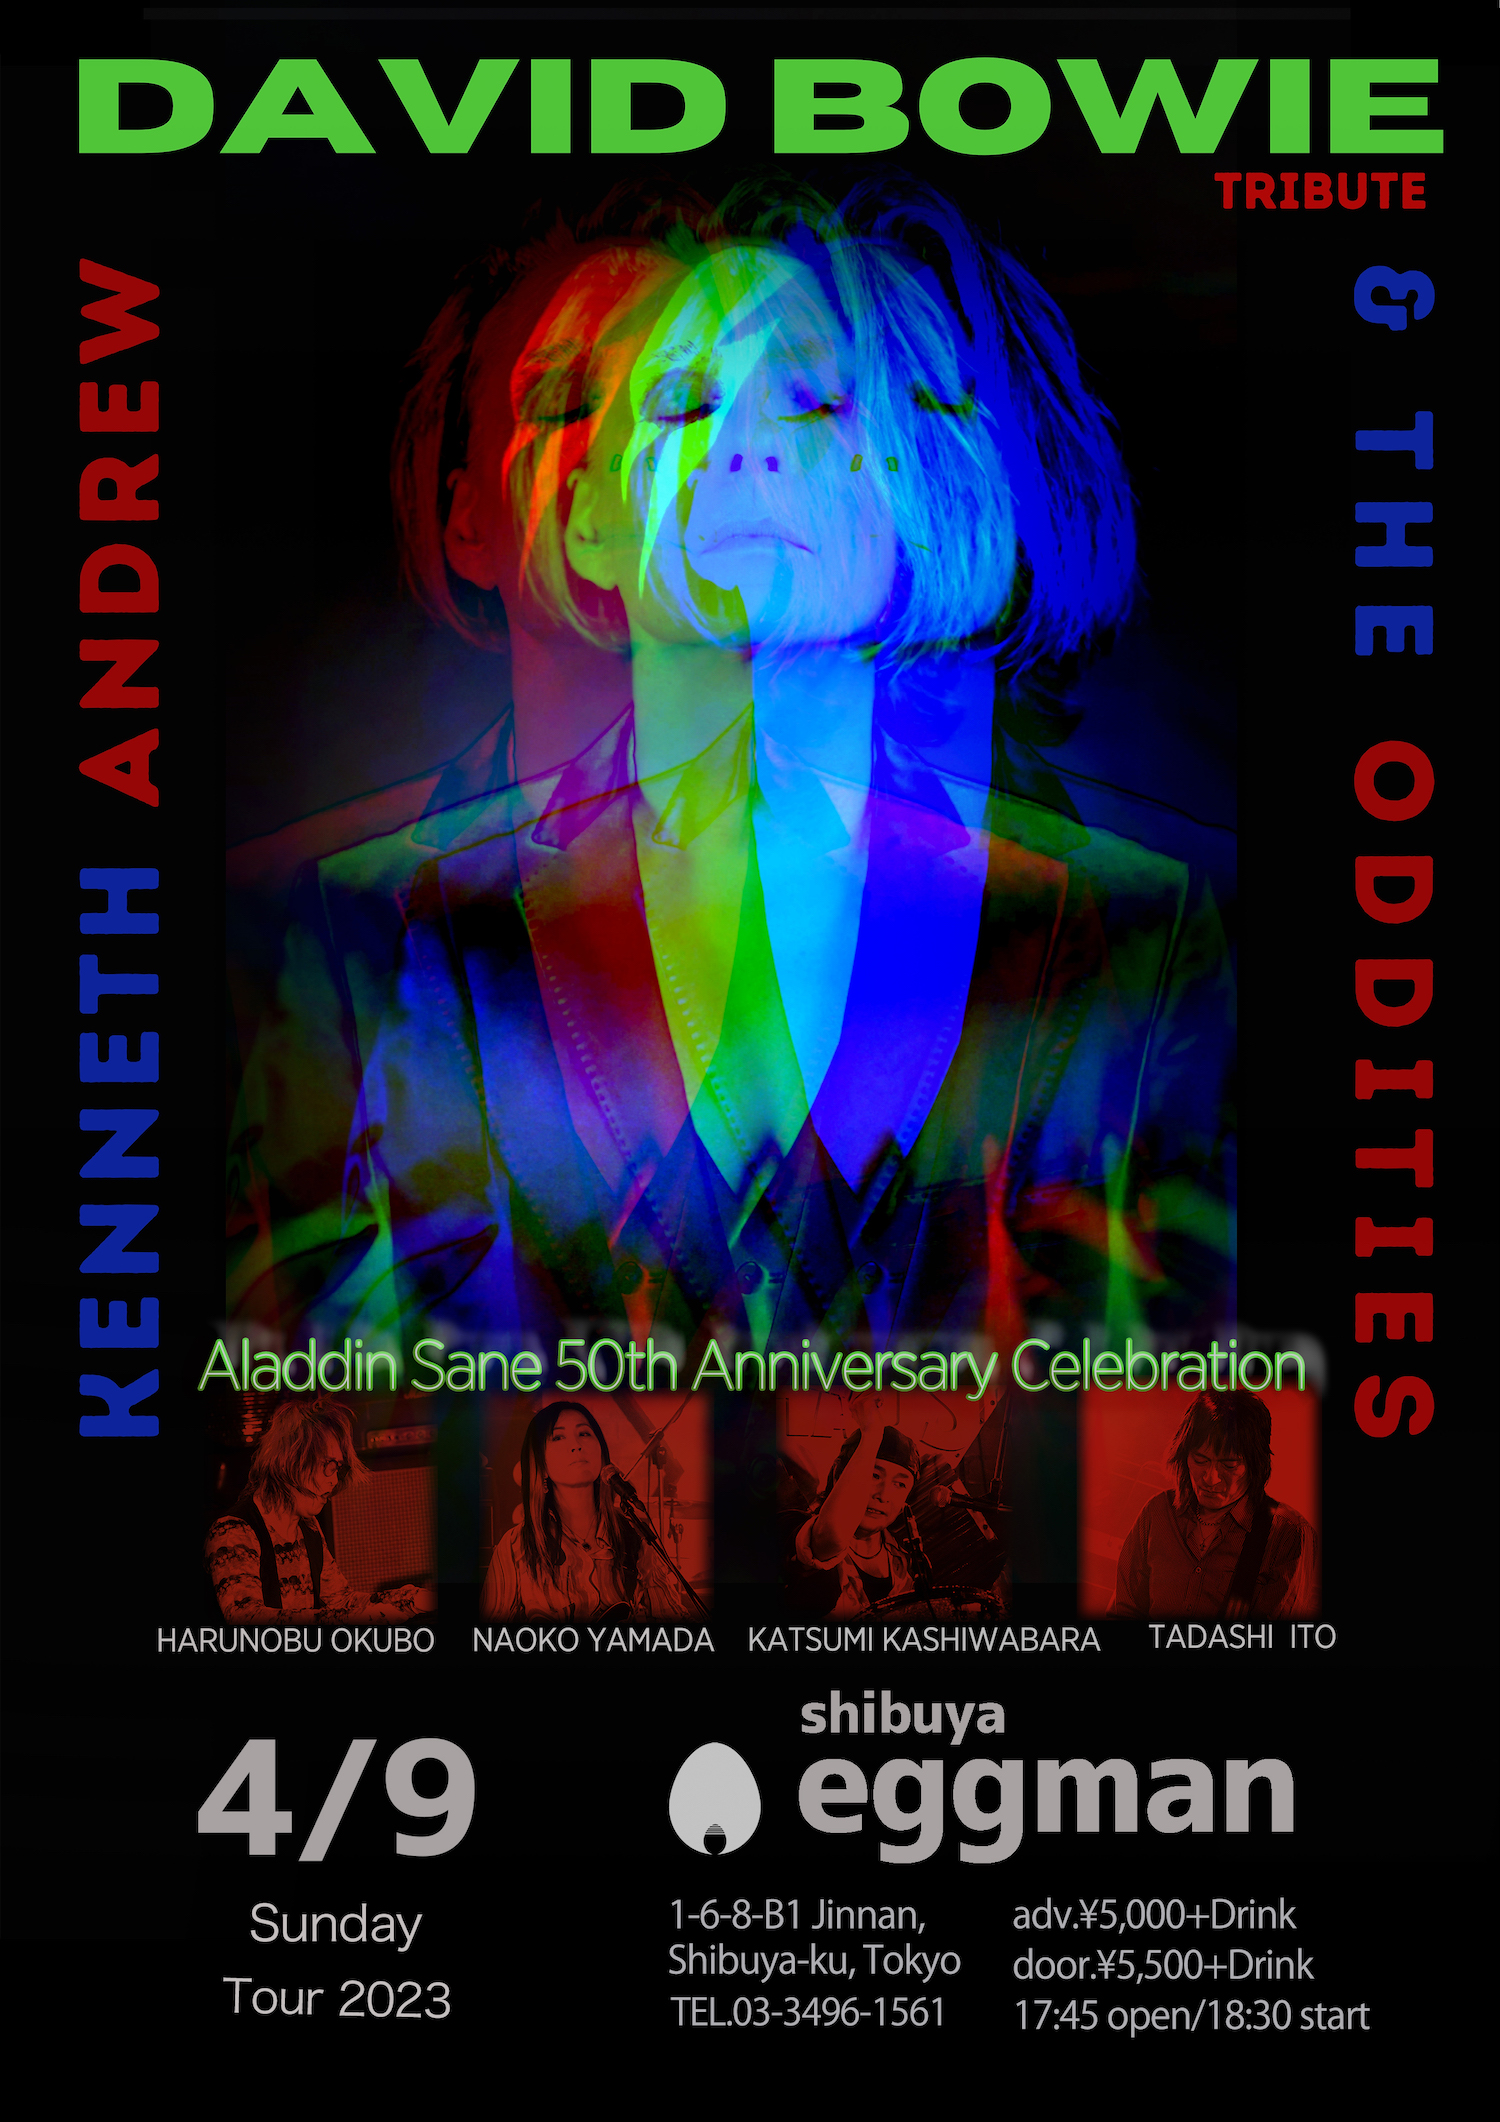 David Bowie Tribute: Aladdin Sane 50th Anniversary Celebration Kenneth Andrew & the Oddities Live